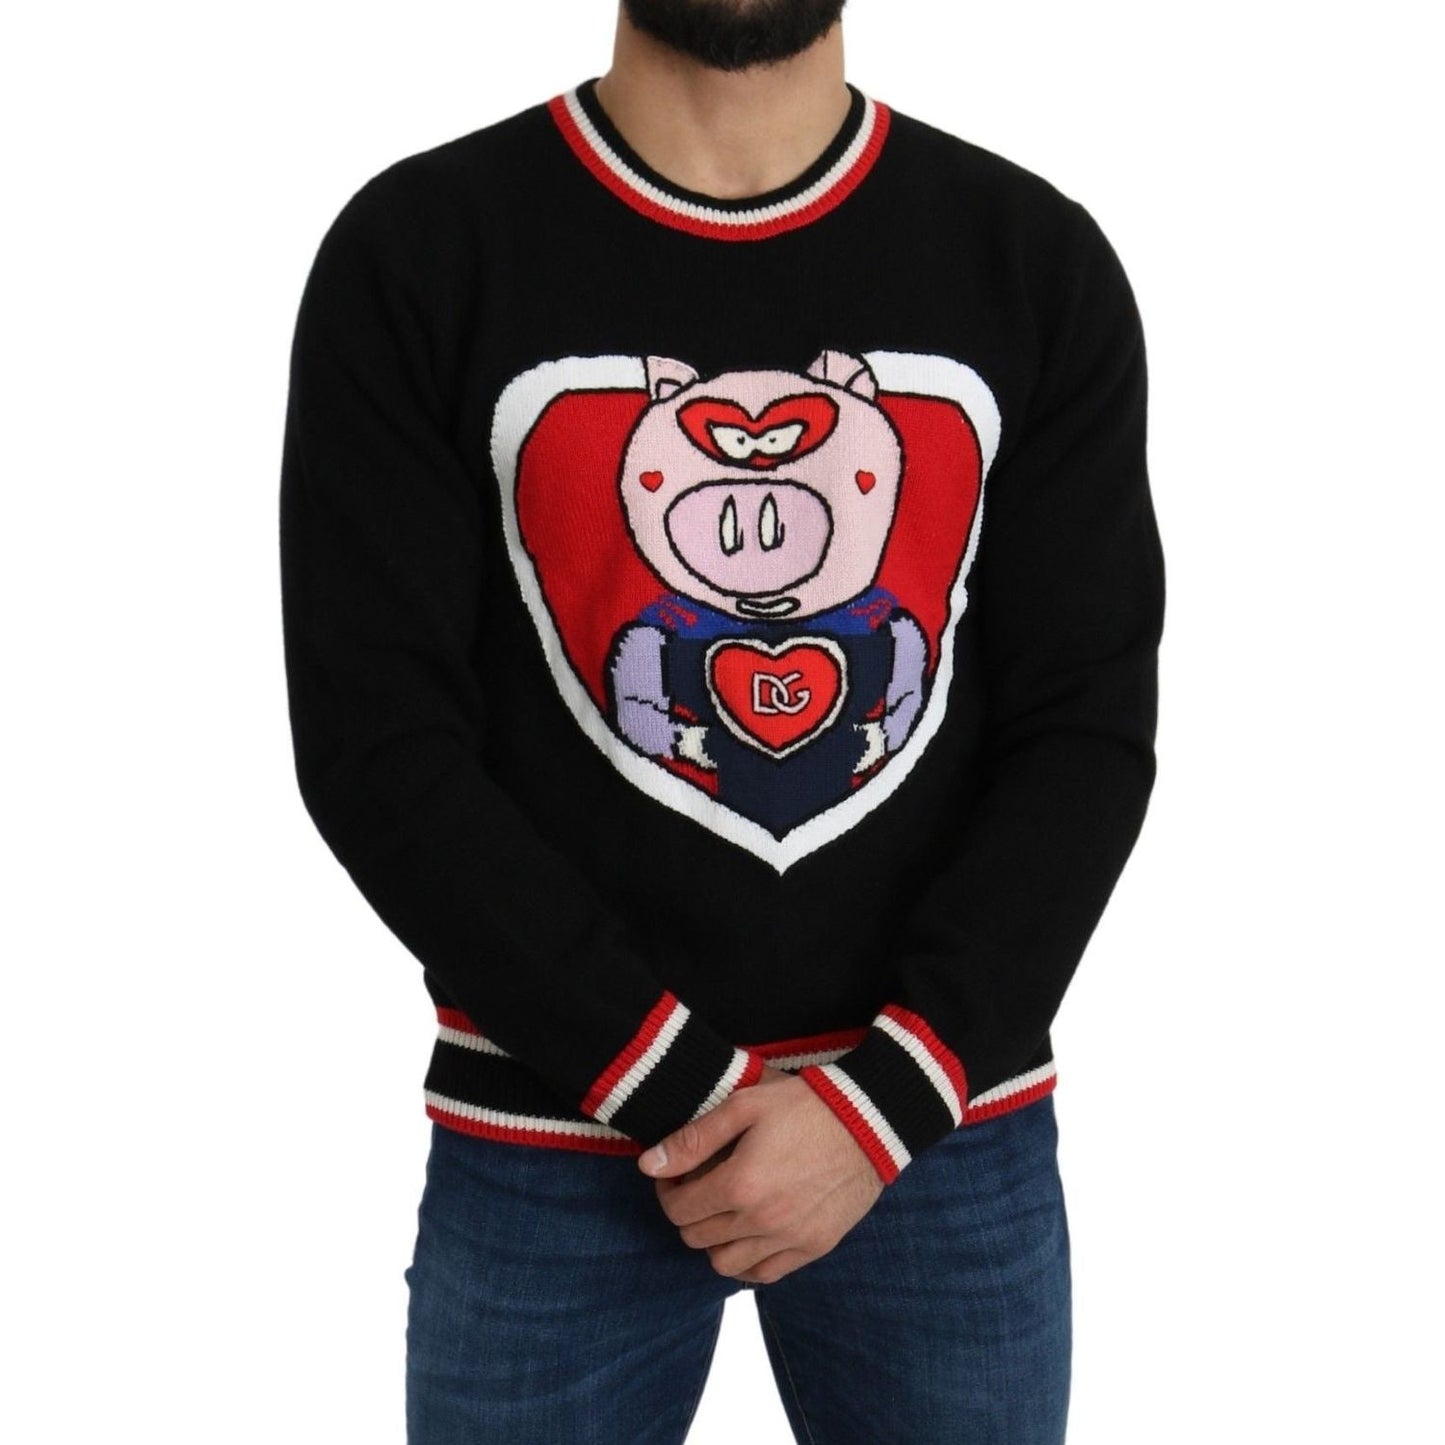 Dolce & Gabbana Elegant Black Cashmere Crew Neck Sweater black-cashmere-pig-of-the-year-pullover-sweater IMG_4385-db11027d-213.jpg